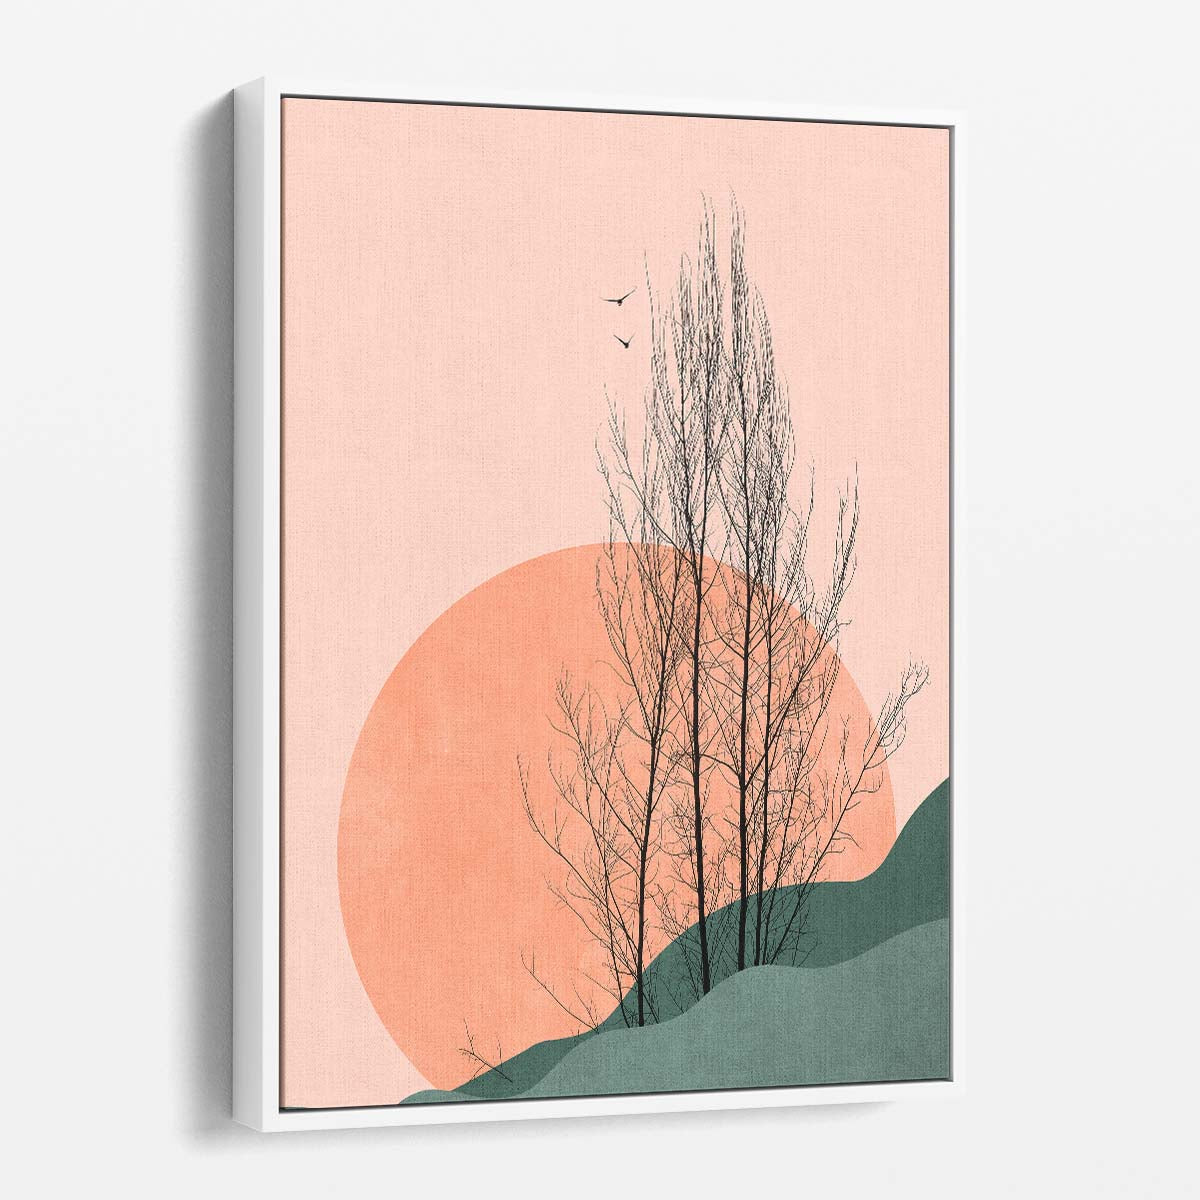 Kubistika's Tranquil Sunset Tree Branch Illustration Wall Art by Luxuriance Designs, made in USA